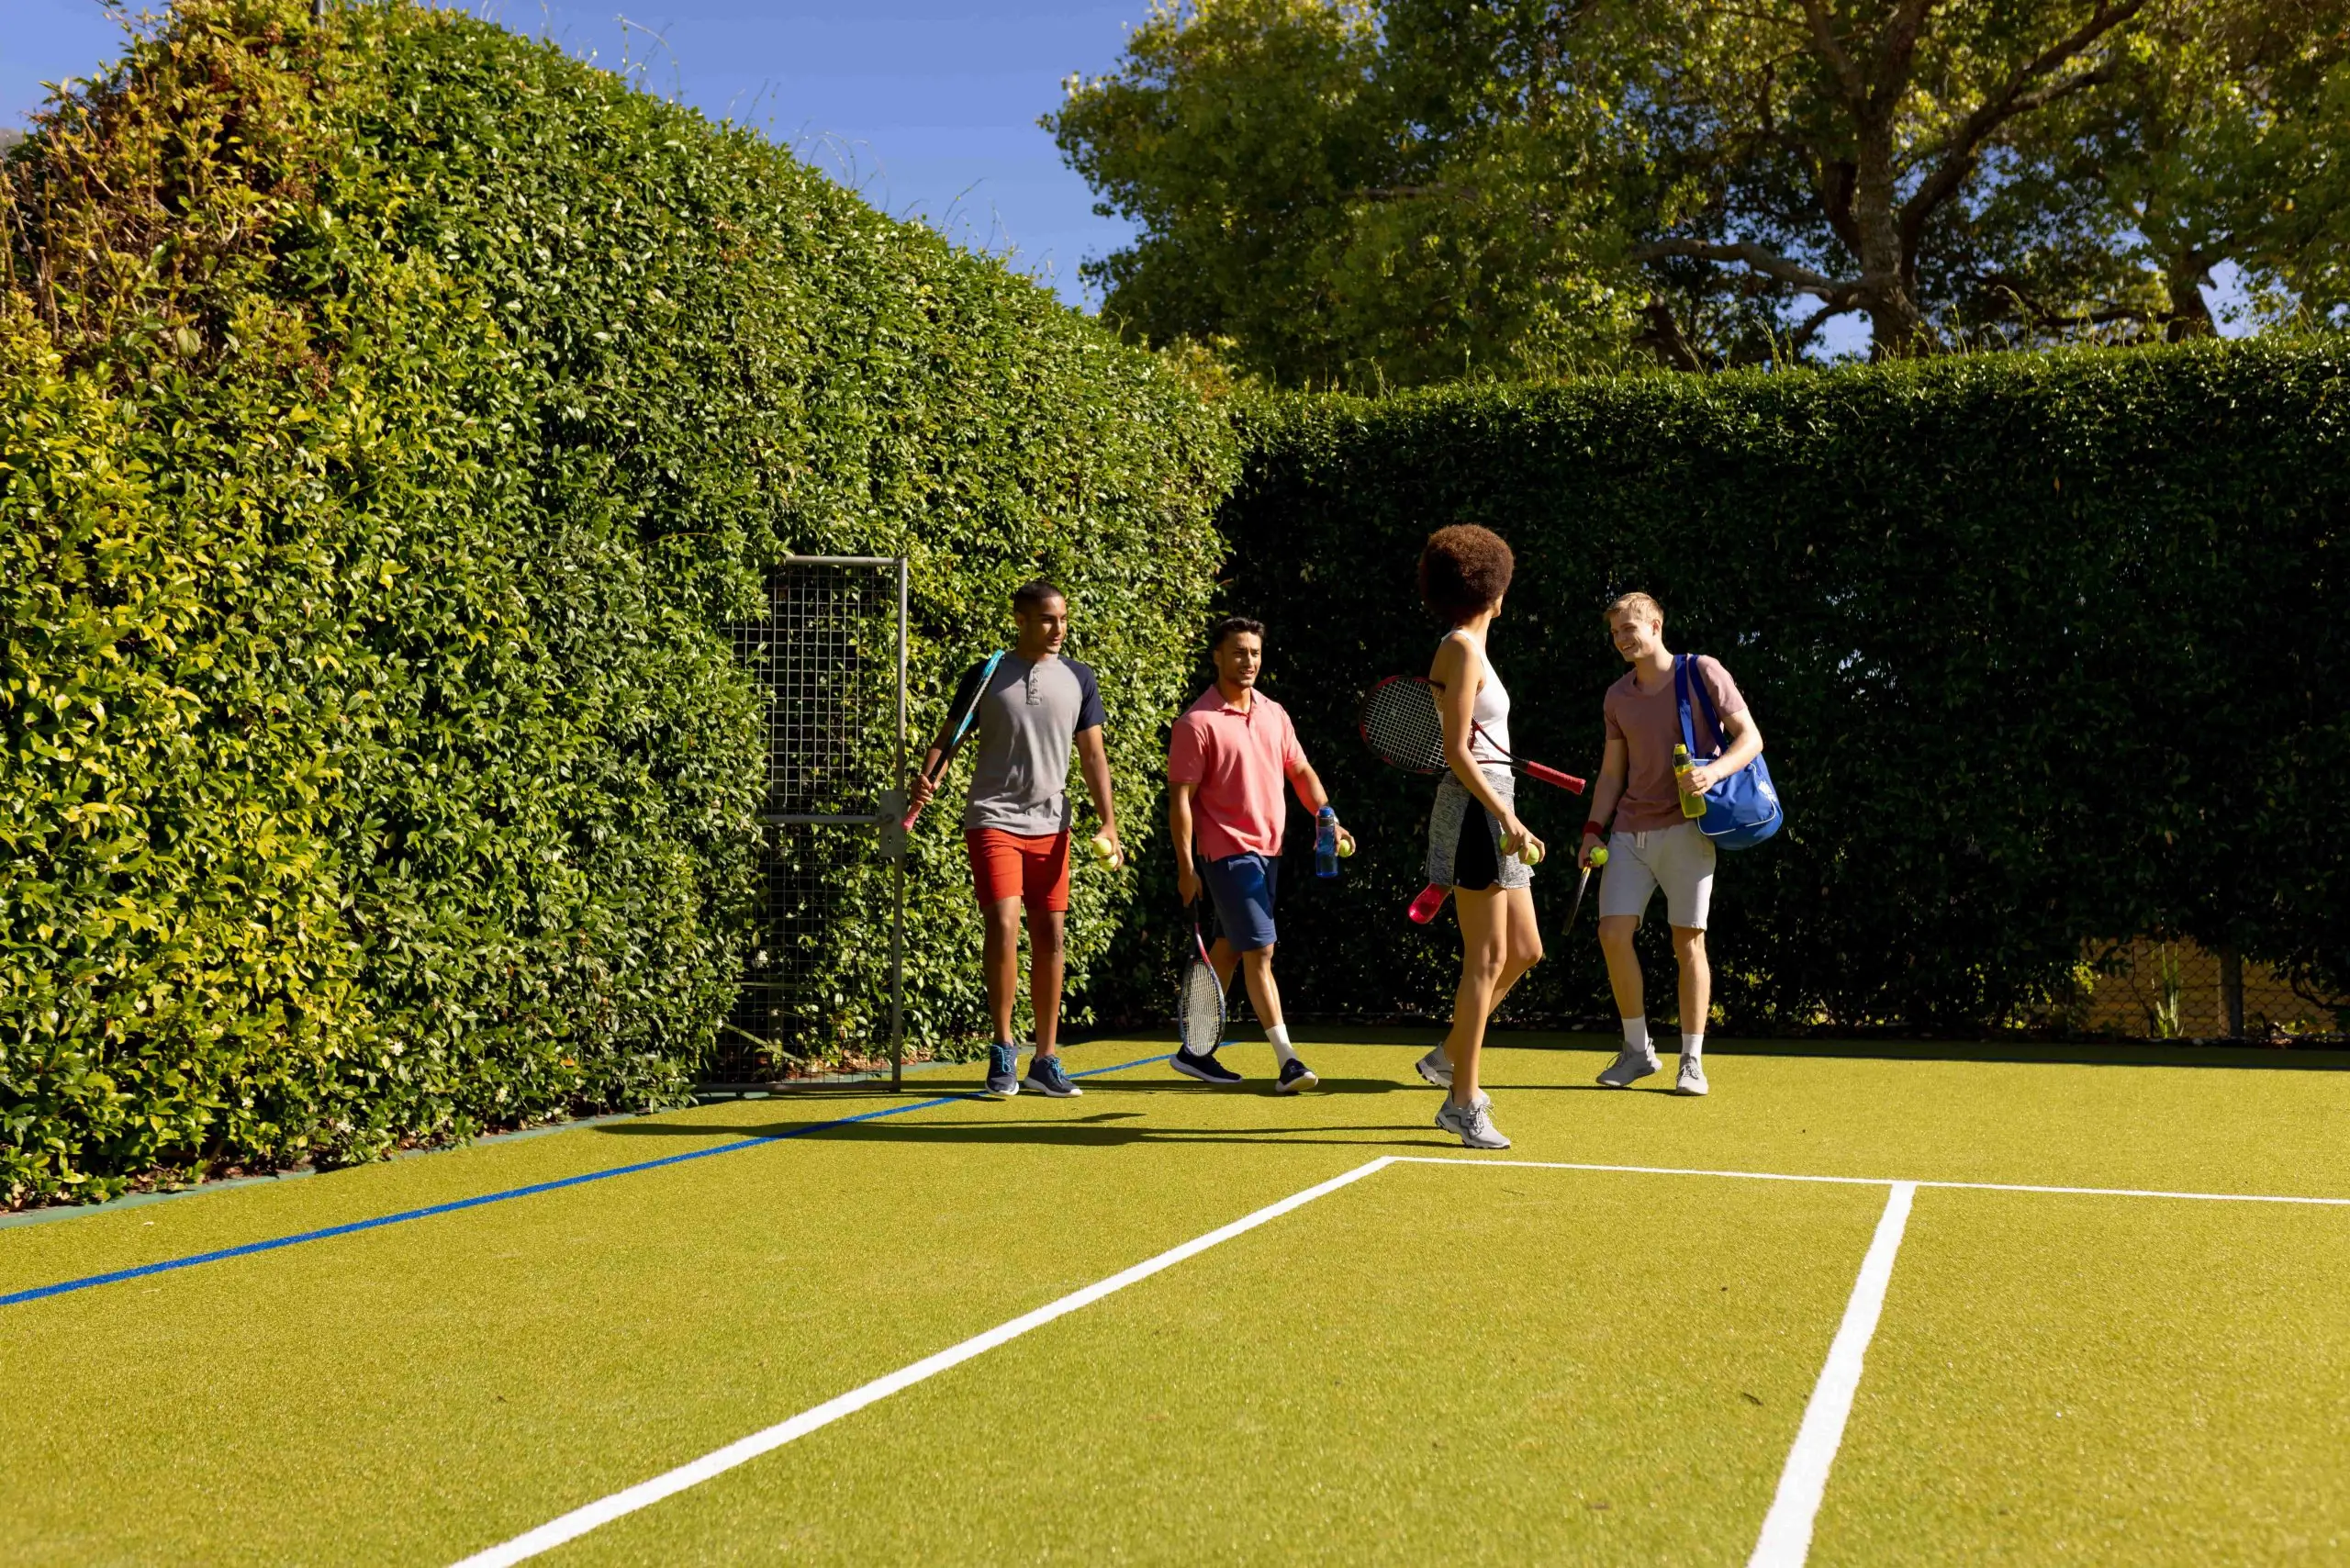 group of friends playing tennis on artificial grass